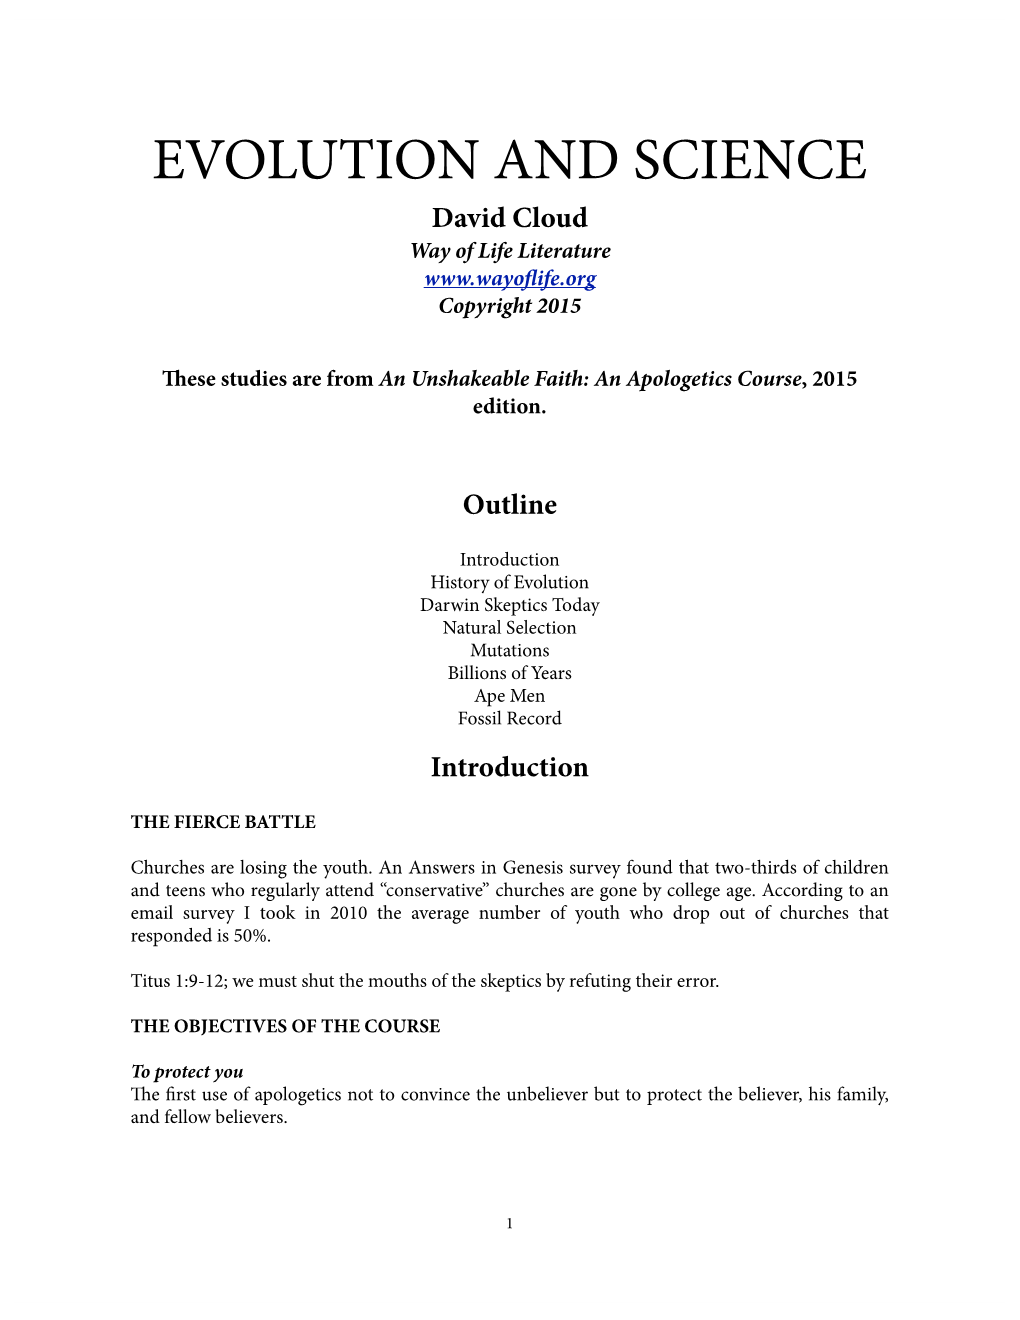 Evolution and Science FBC Student Notes.Pages